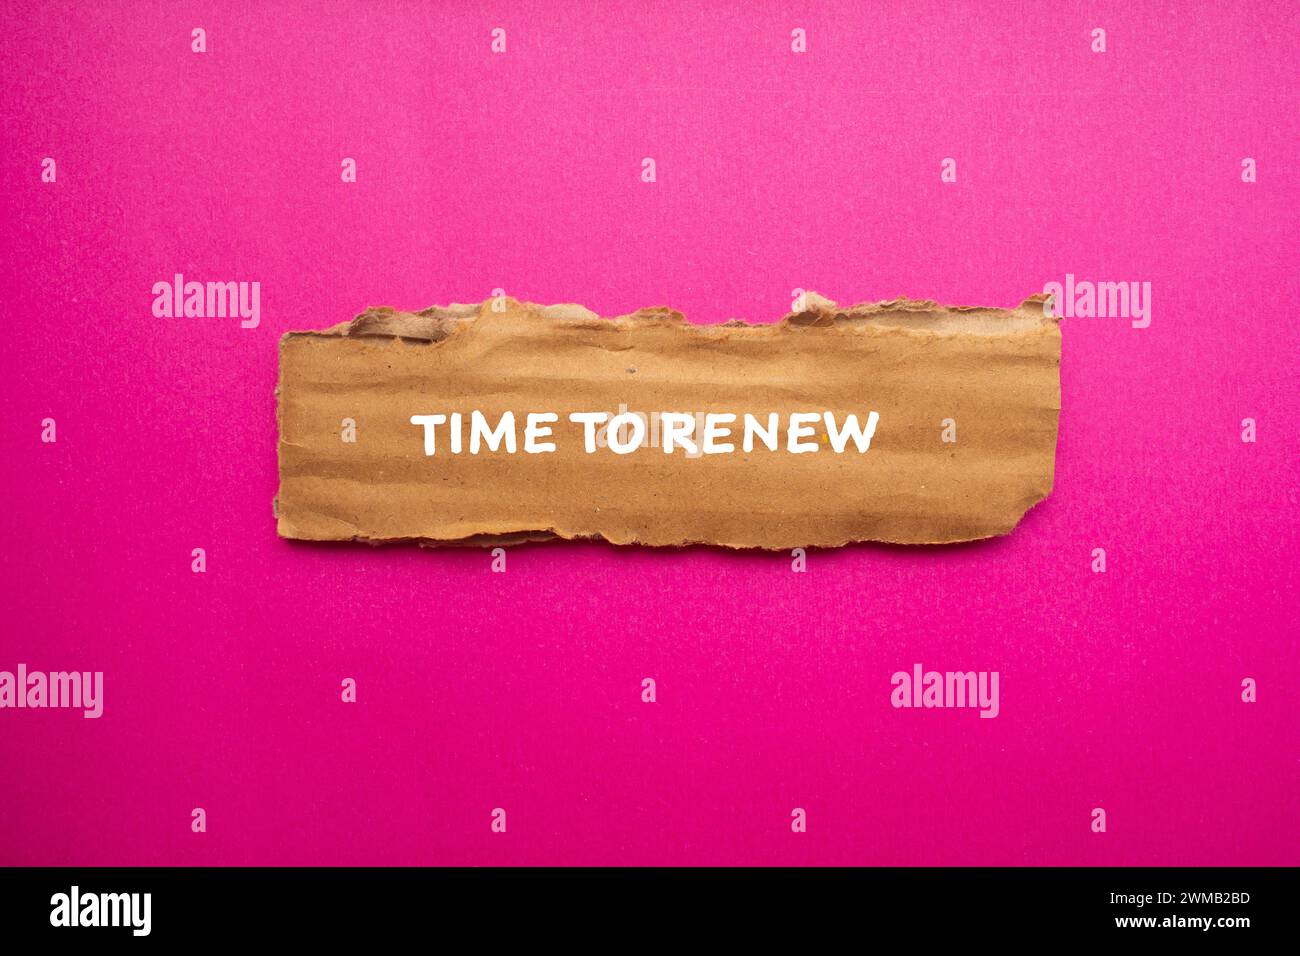 Time to renew words written on torn paper with pink background. Conceptual business symbol. Copy space. Stock Photo